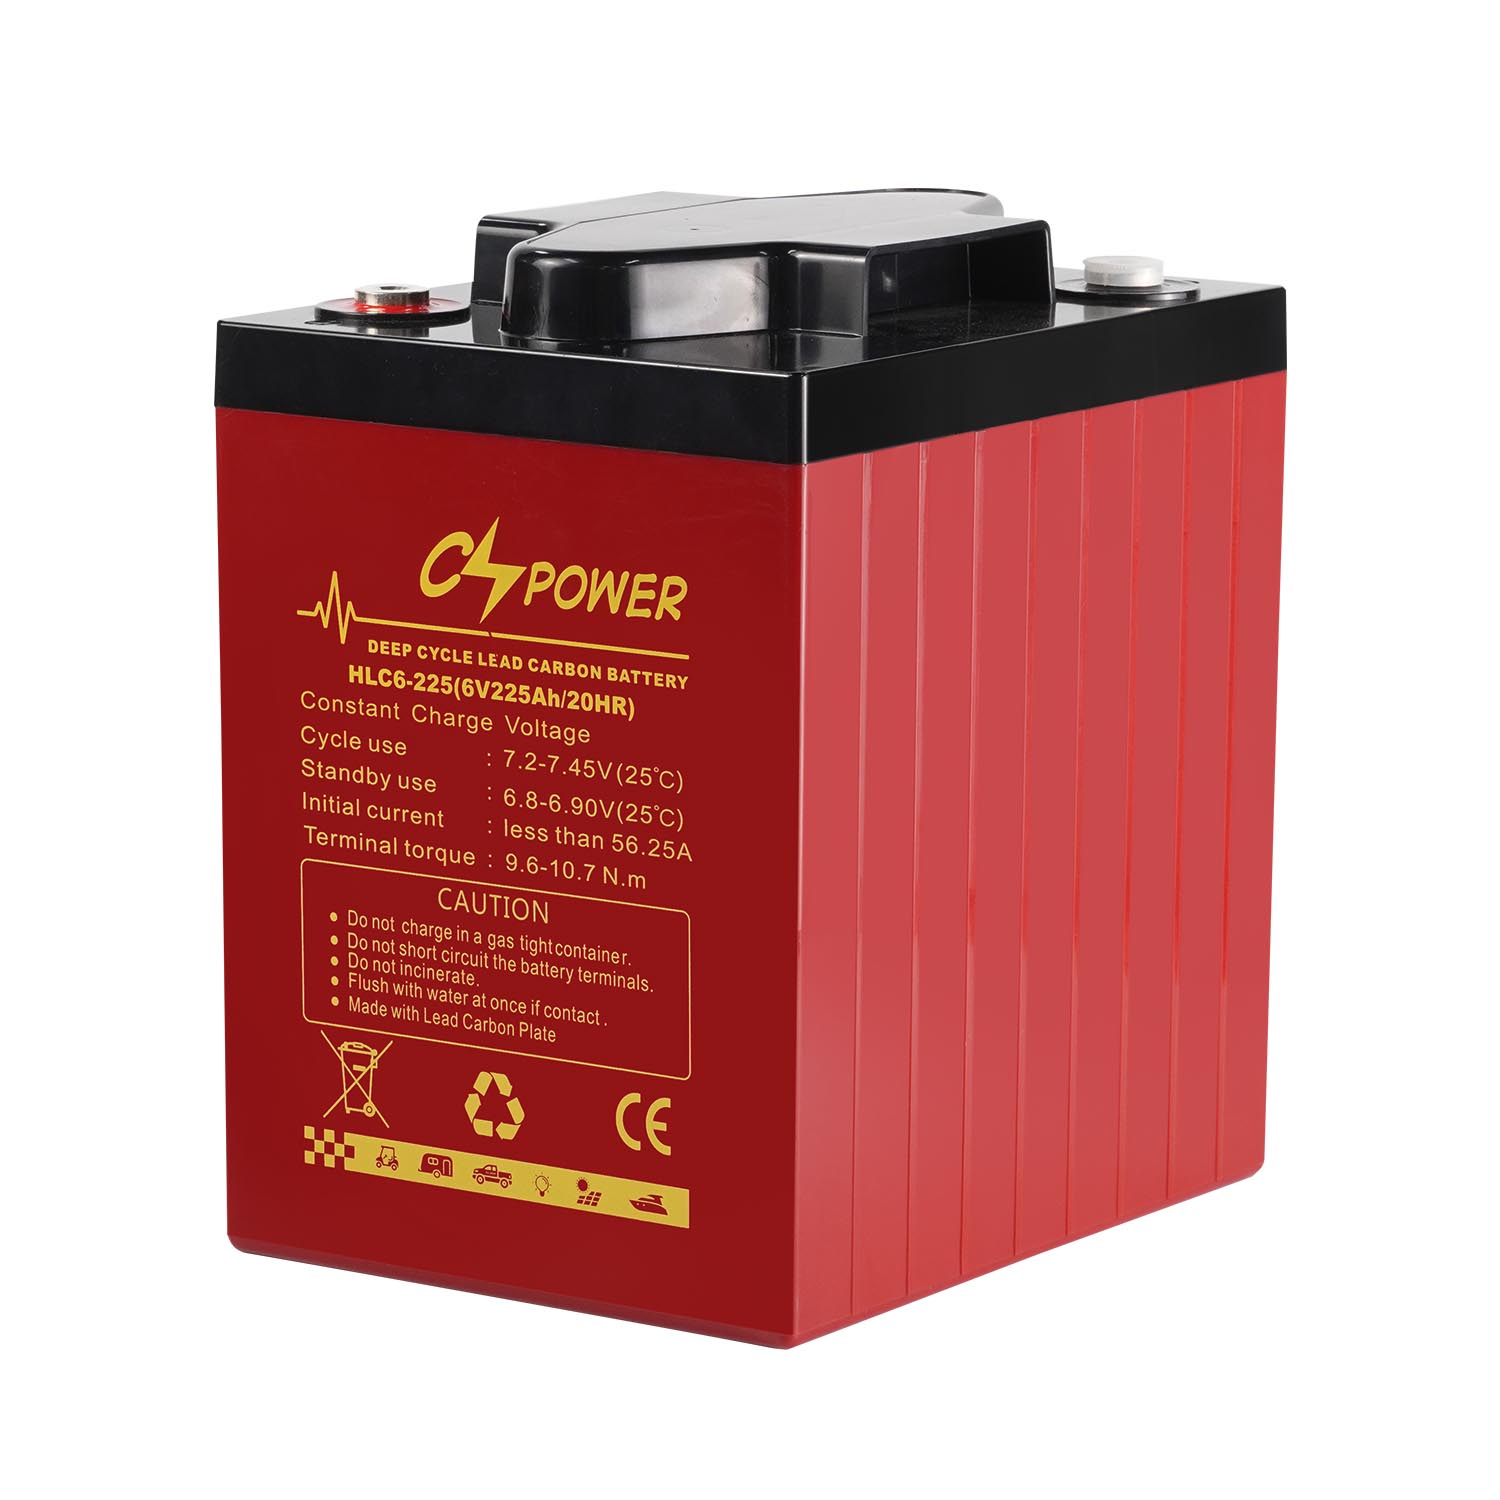 Vhidhiyo: CSPower HLC6-225 6V 225Ah Fast Charge Lead Carbon Battery